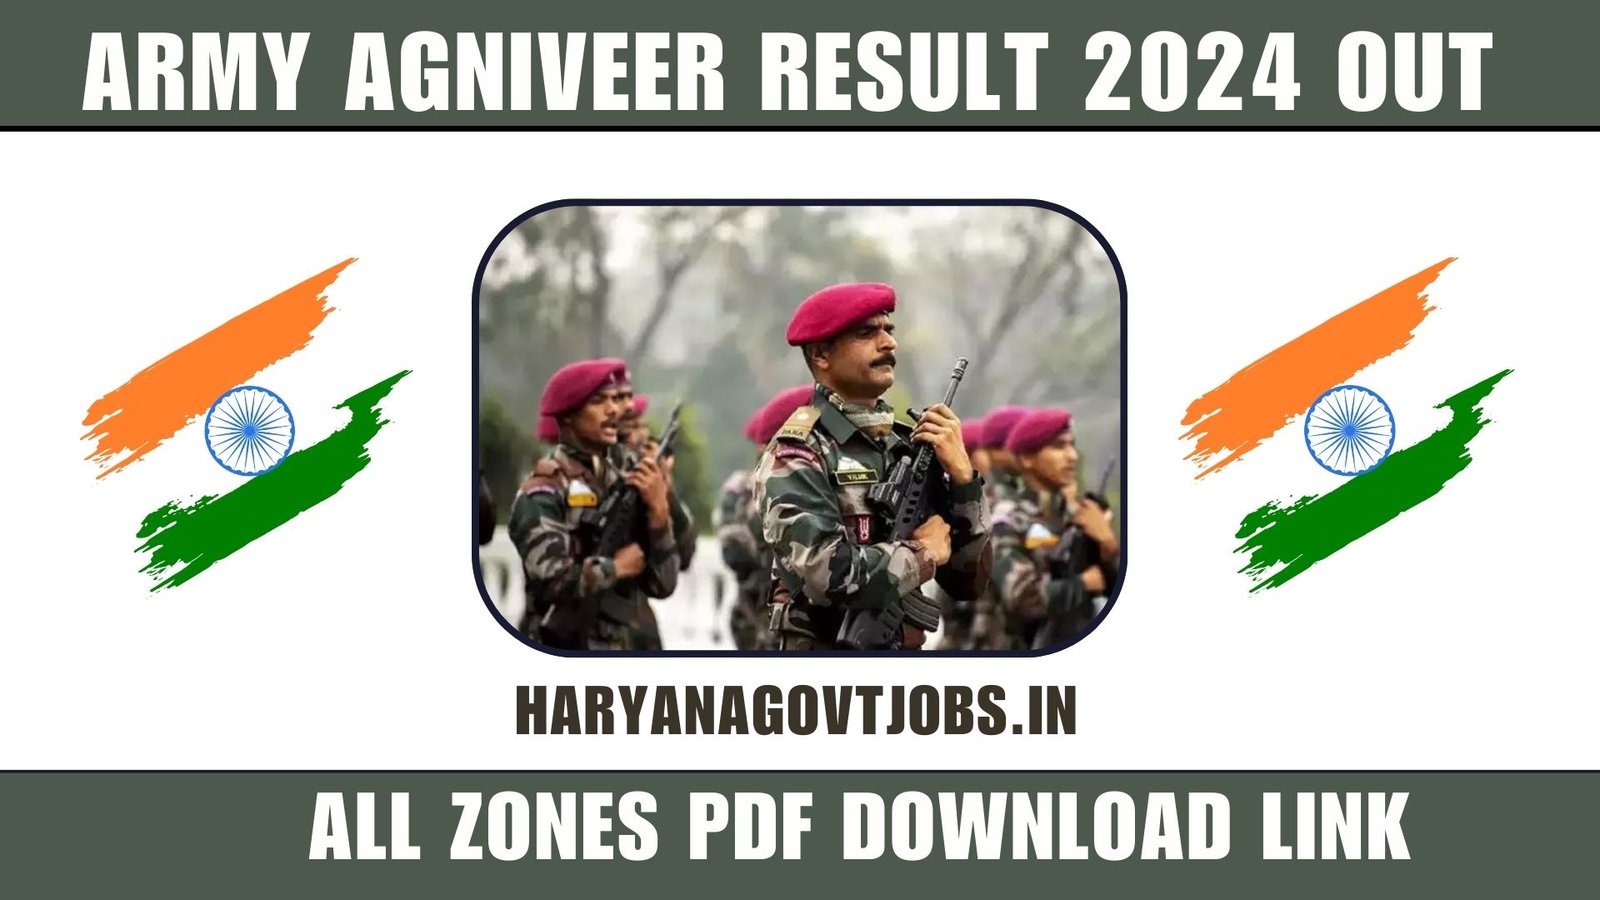 Army Agniveer Result 2024 Overview